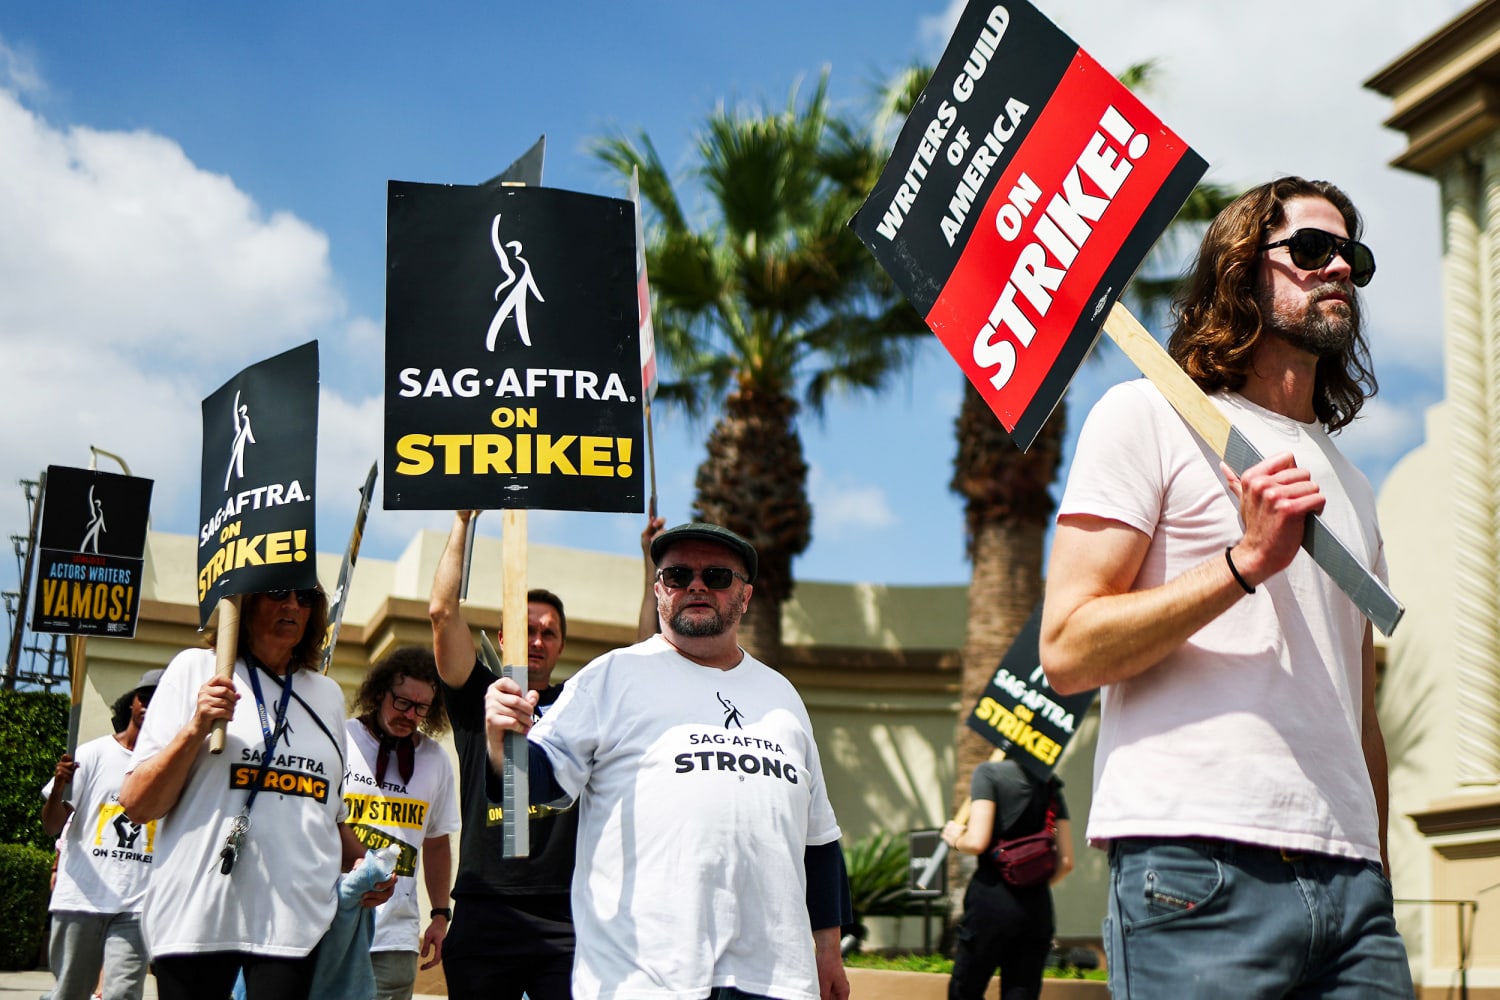 Hollywood screenwriters and studios reach tentative agreement to resolve strike